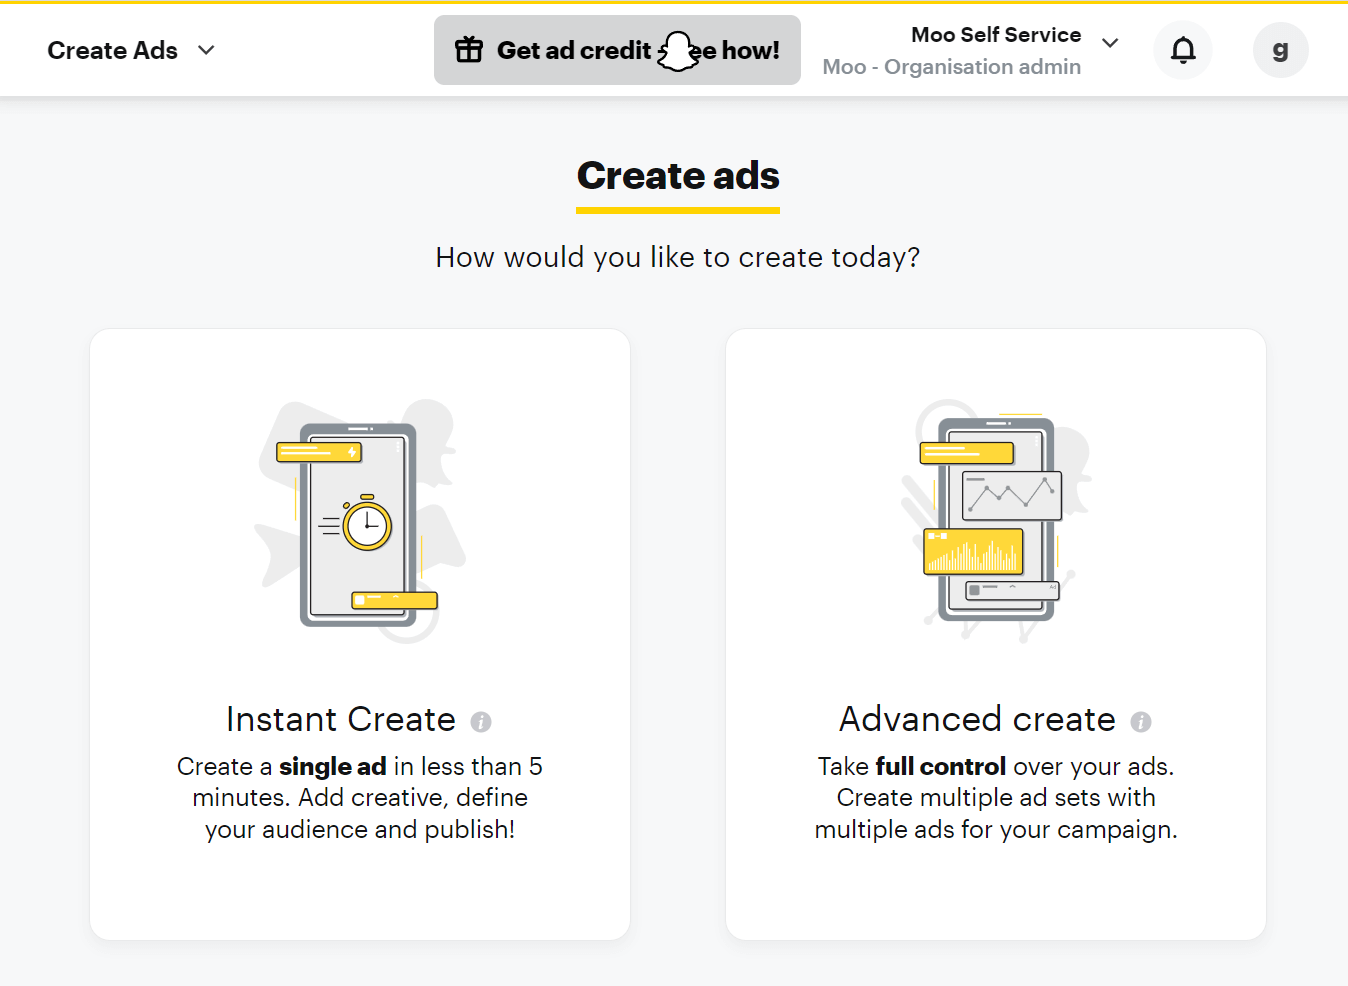 how to create ads for Snapchat